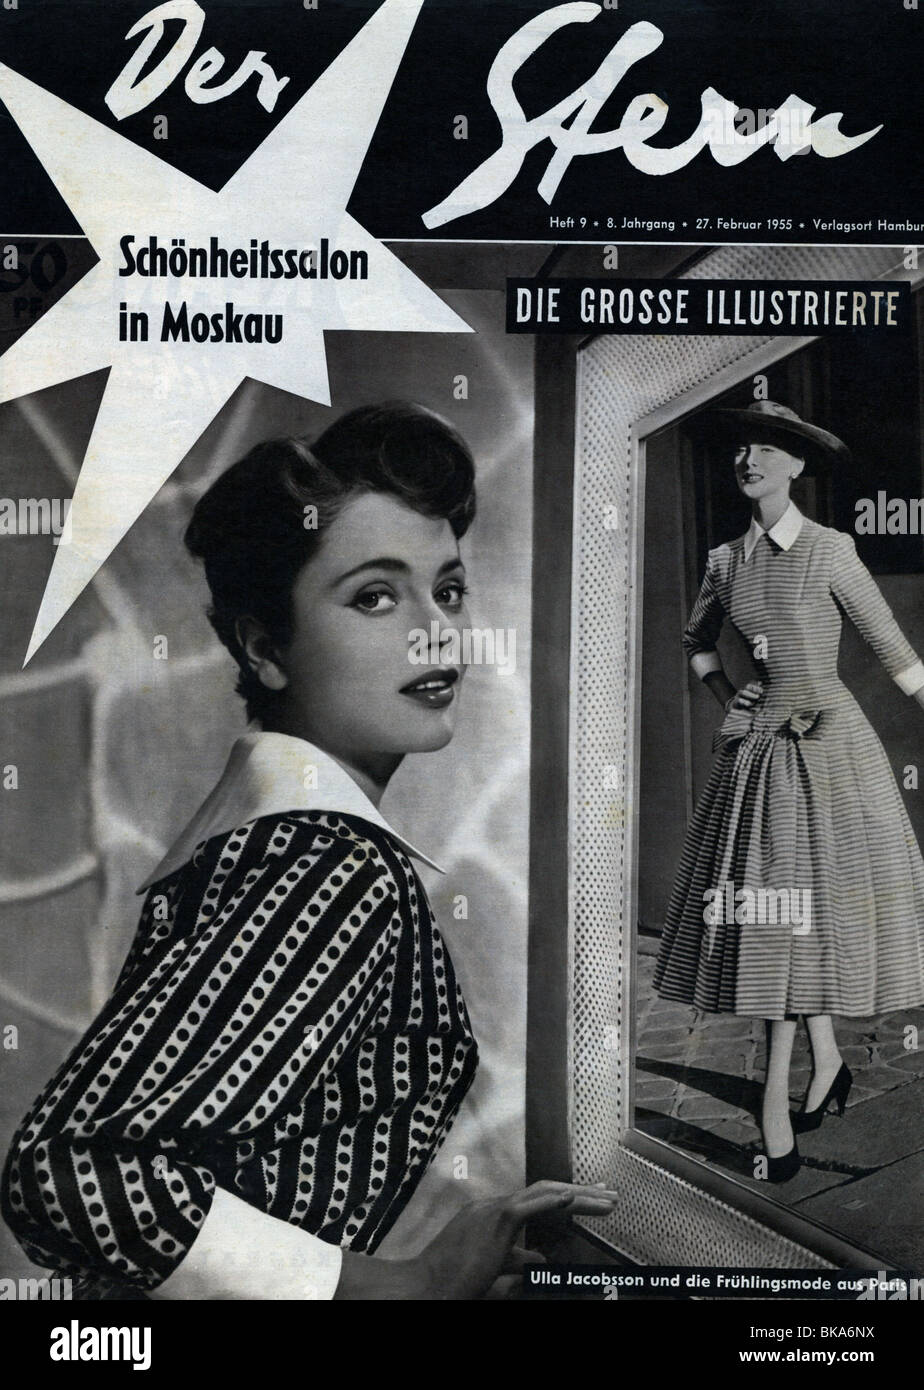 journals / magazines, 1955, 'Der Stern', Hamburg, volume 8, number 9, title cover with Ulla Jacobsson and spring fashion, 27.2.1955, Stock Photo